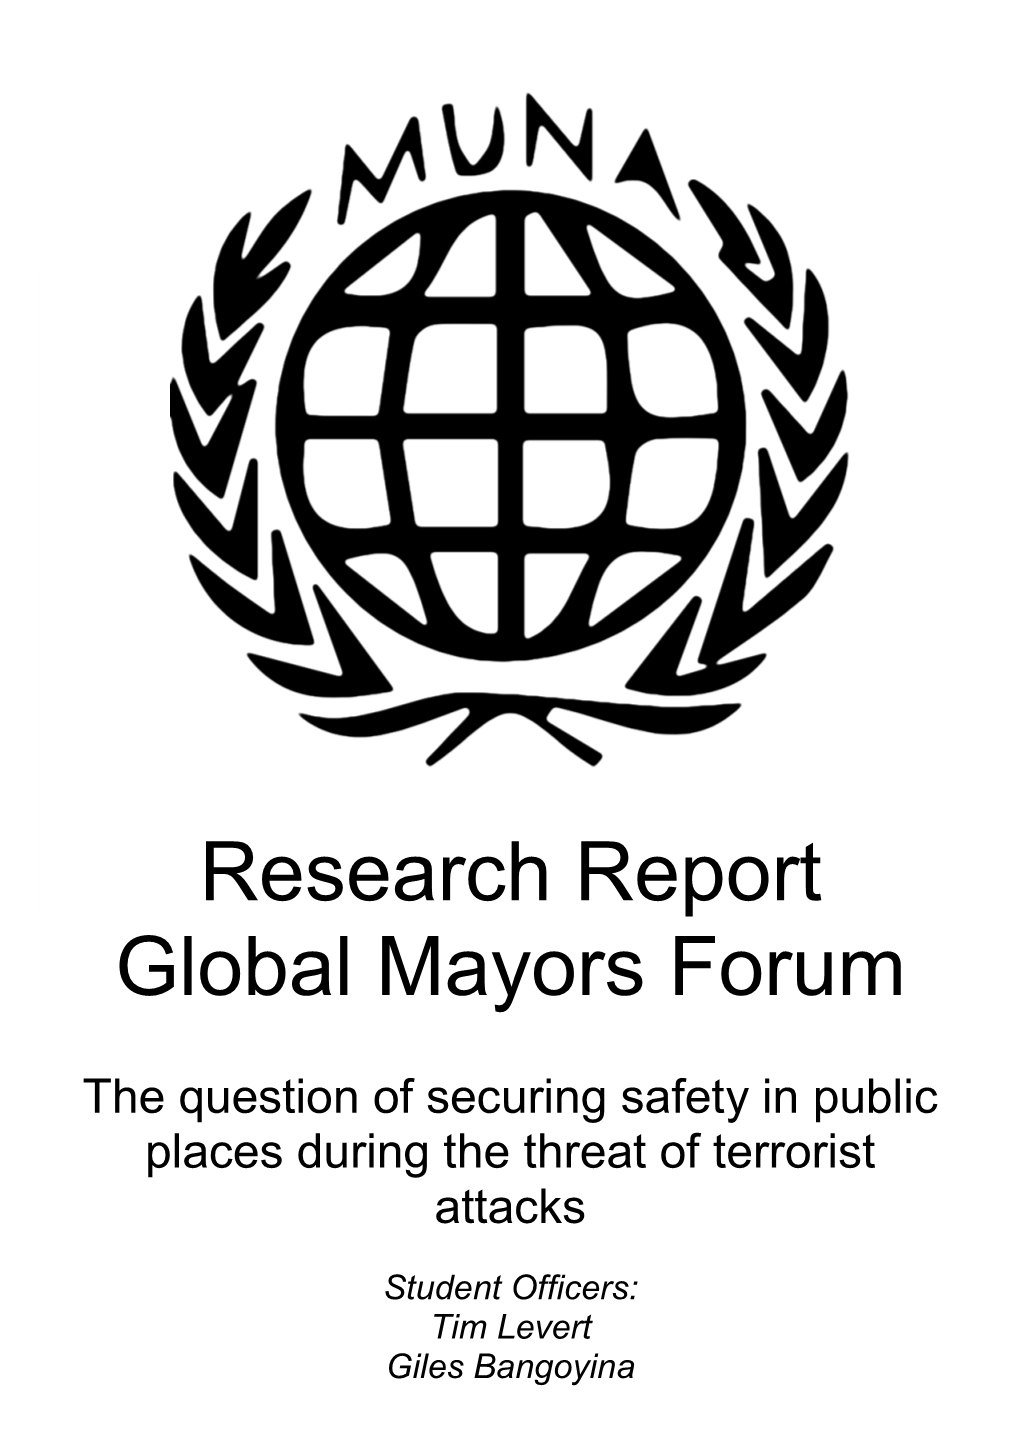 Research Report Global Mayors Forum